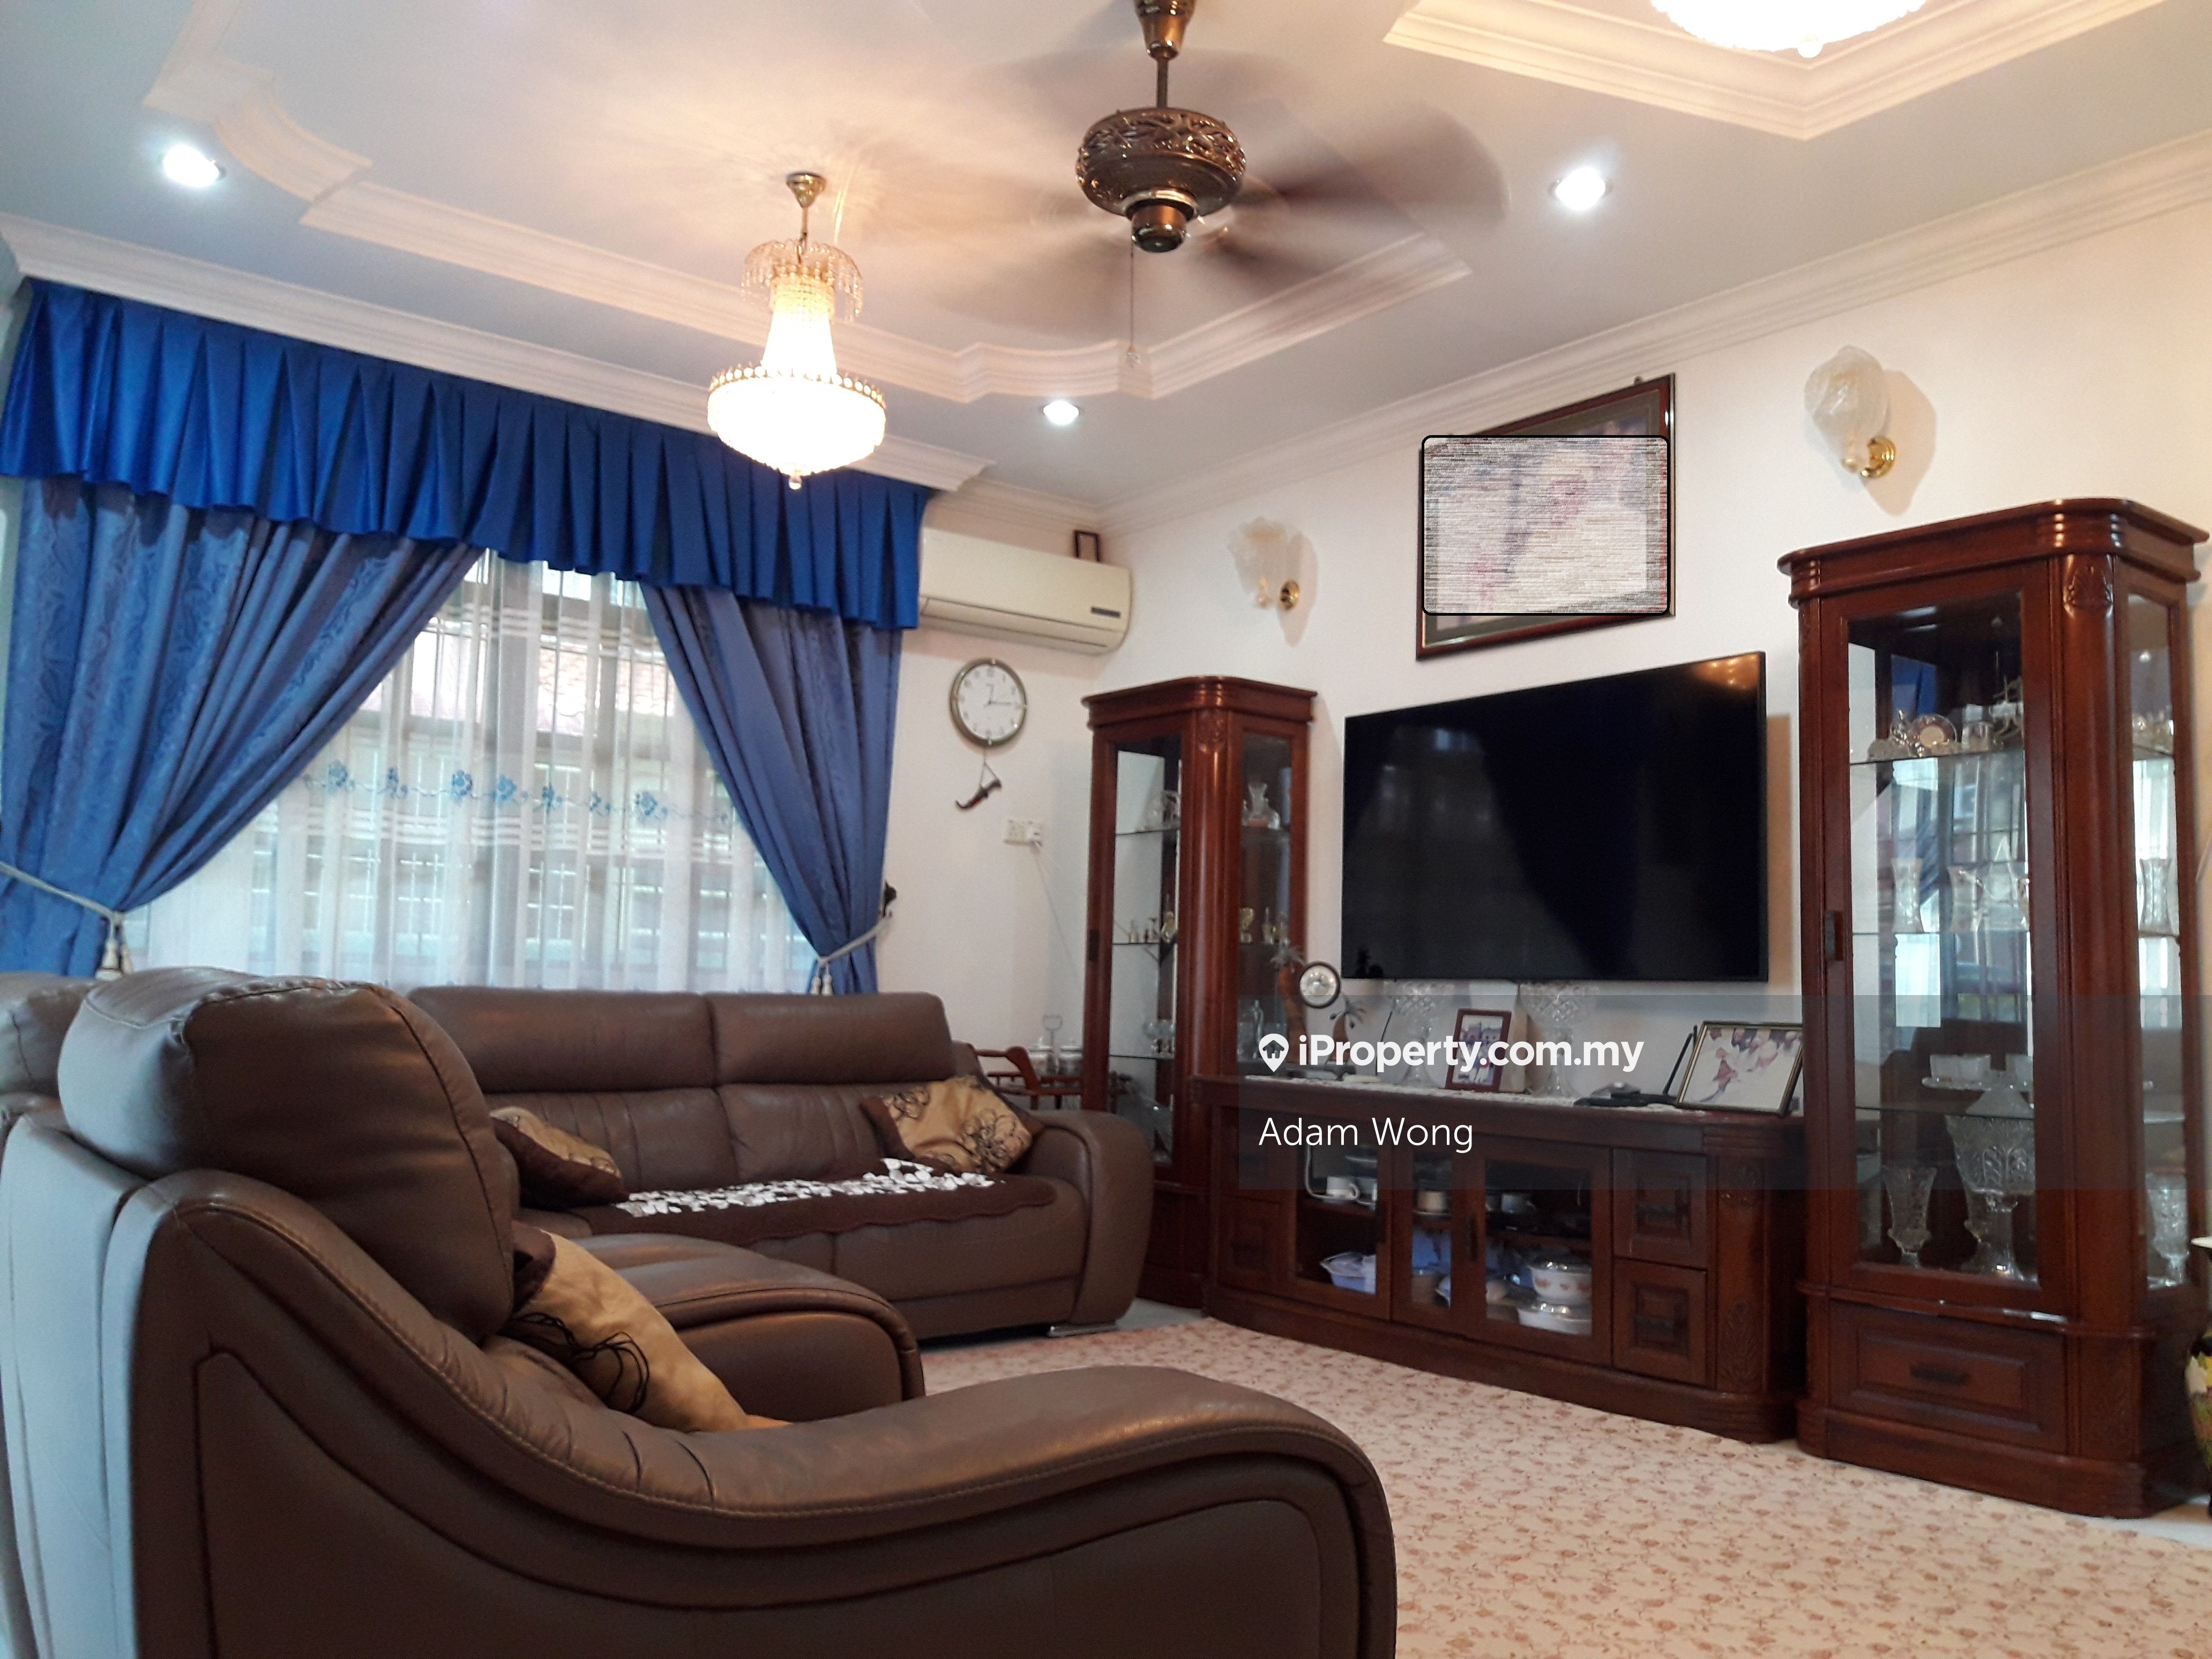 Fully Furnished Good Condition Double Storey Bungalow at Taman Cemara